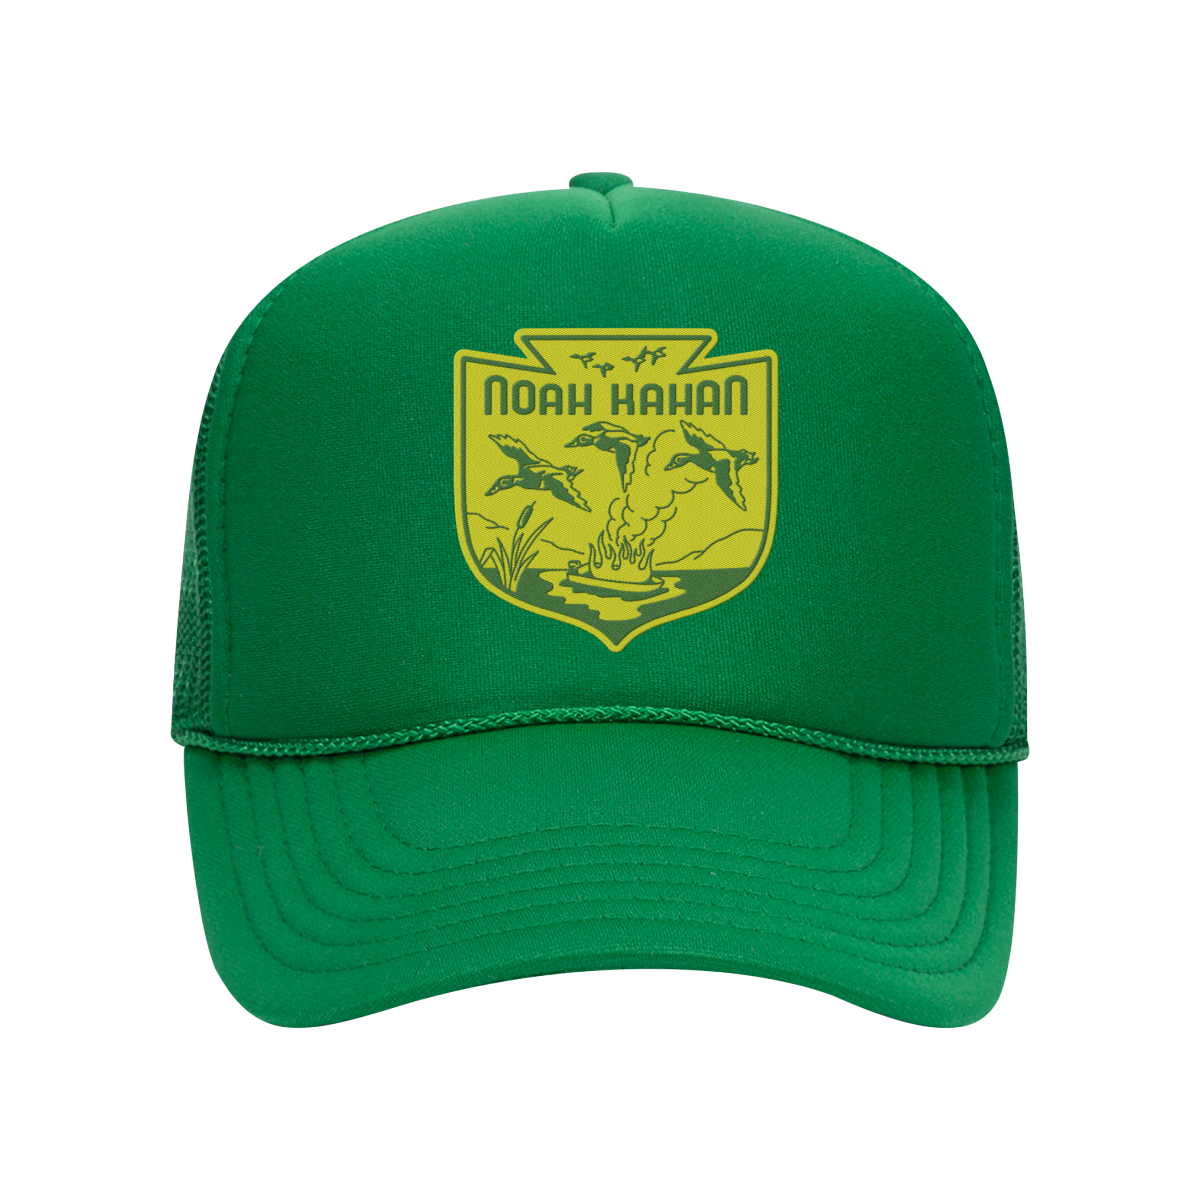 Bright green mesh trucker cap with Noah Kahan mallard duck art emblem on front in bright yellow and rope detail on brim.